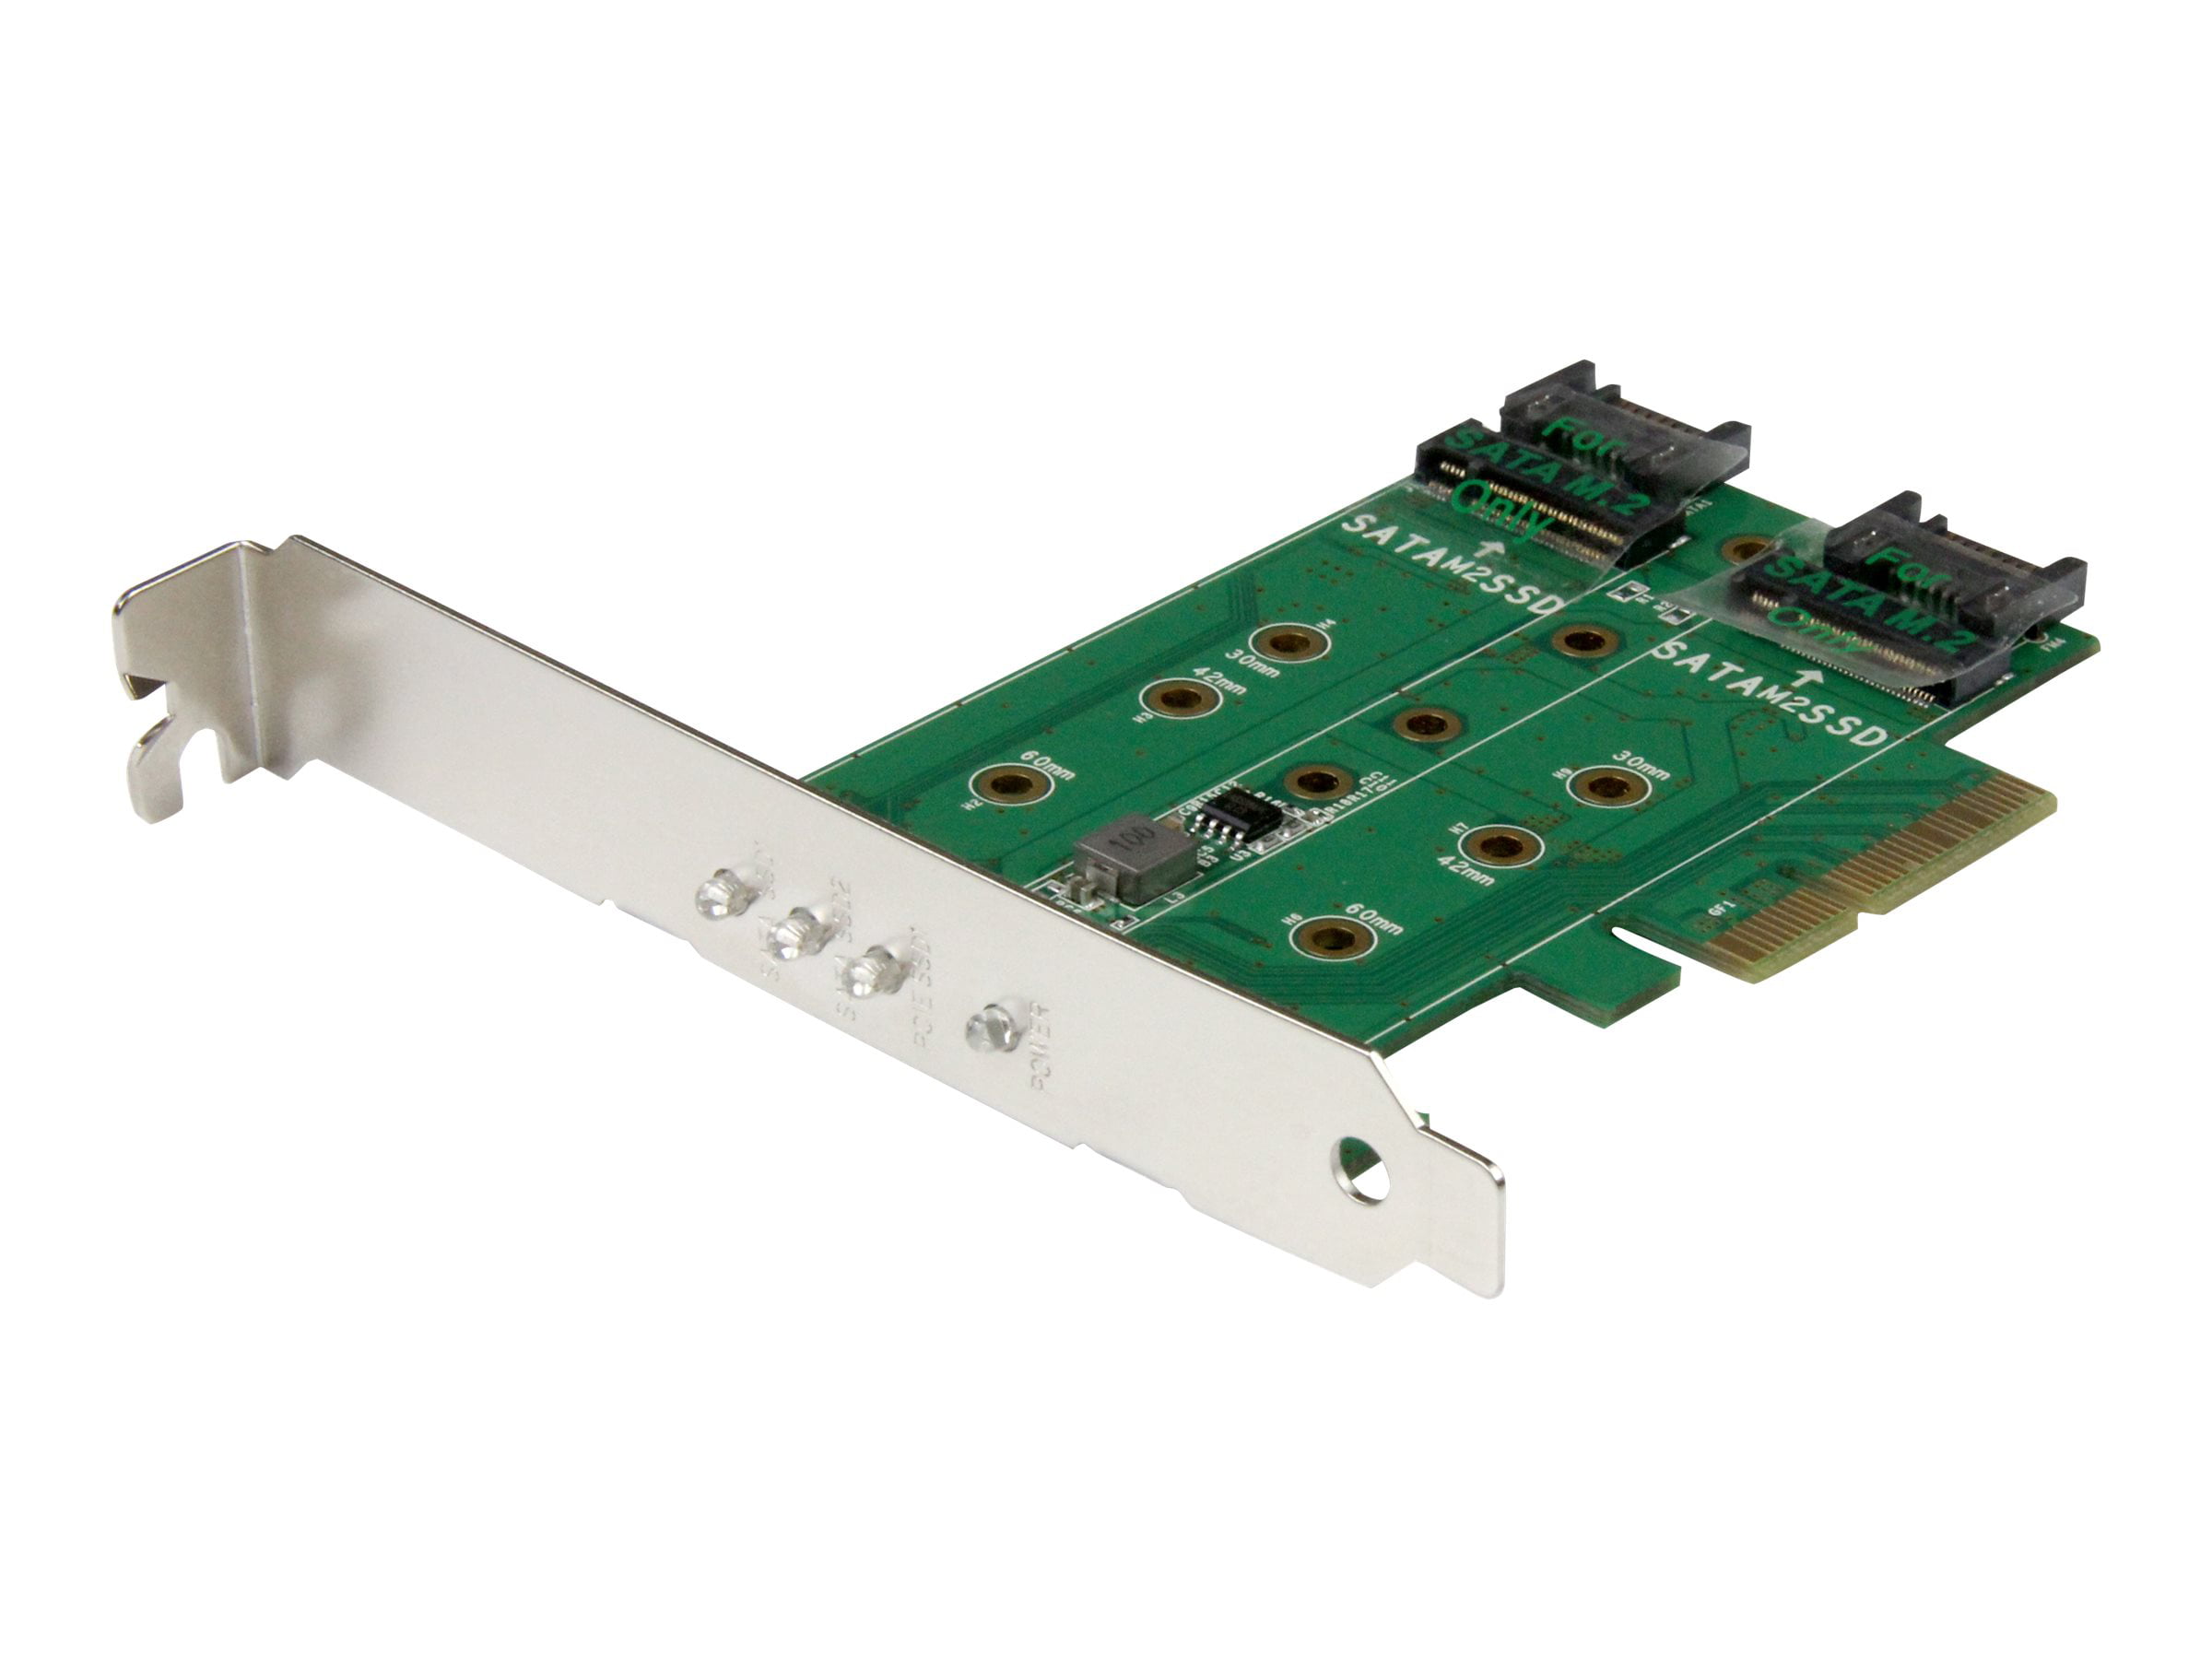 NVMe AHCI PCIe x4 M.2 NGFF SSD to PCIE 3.0 x4 converter adapter c GN 